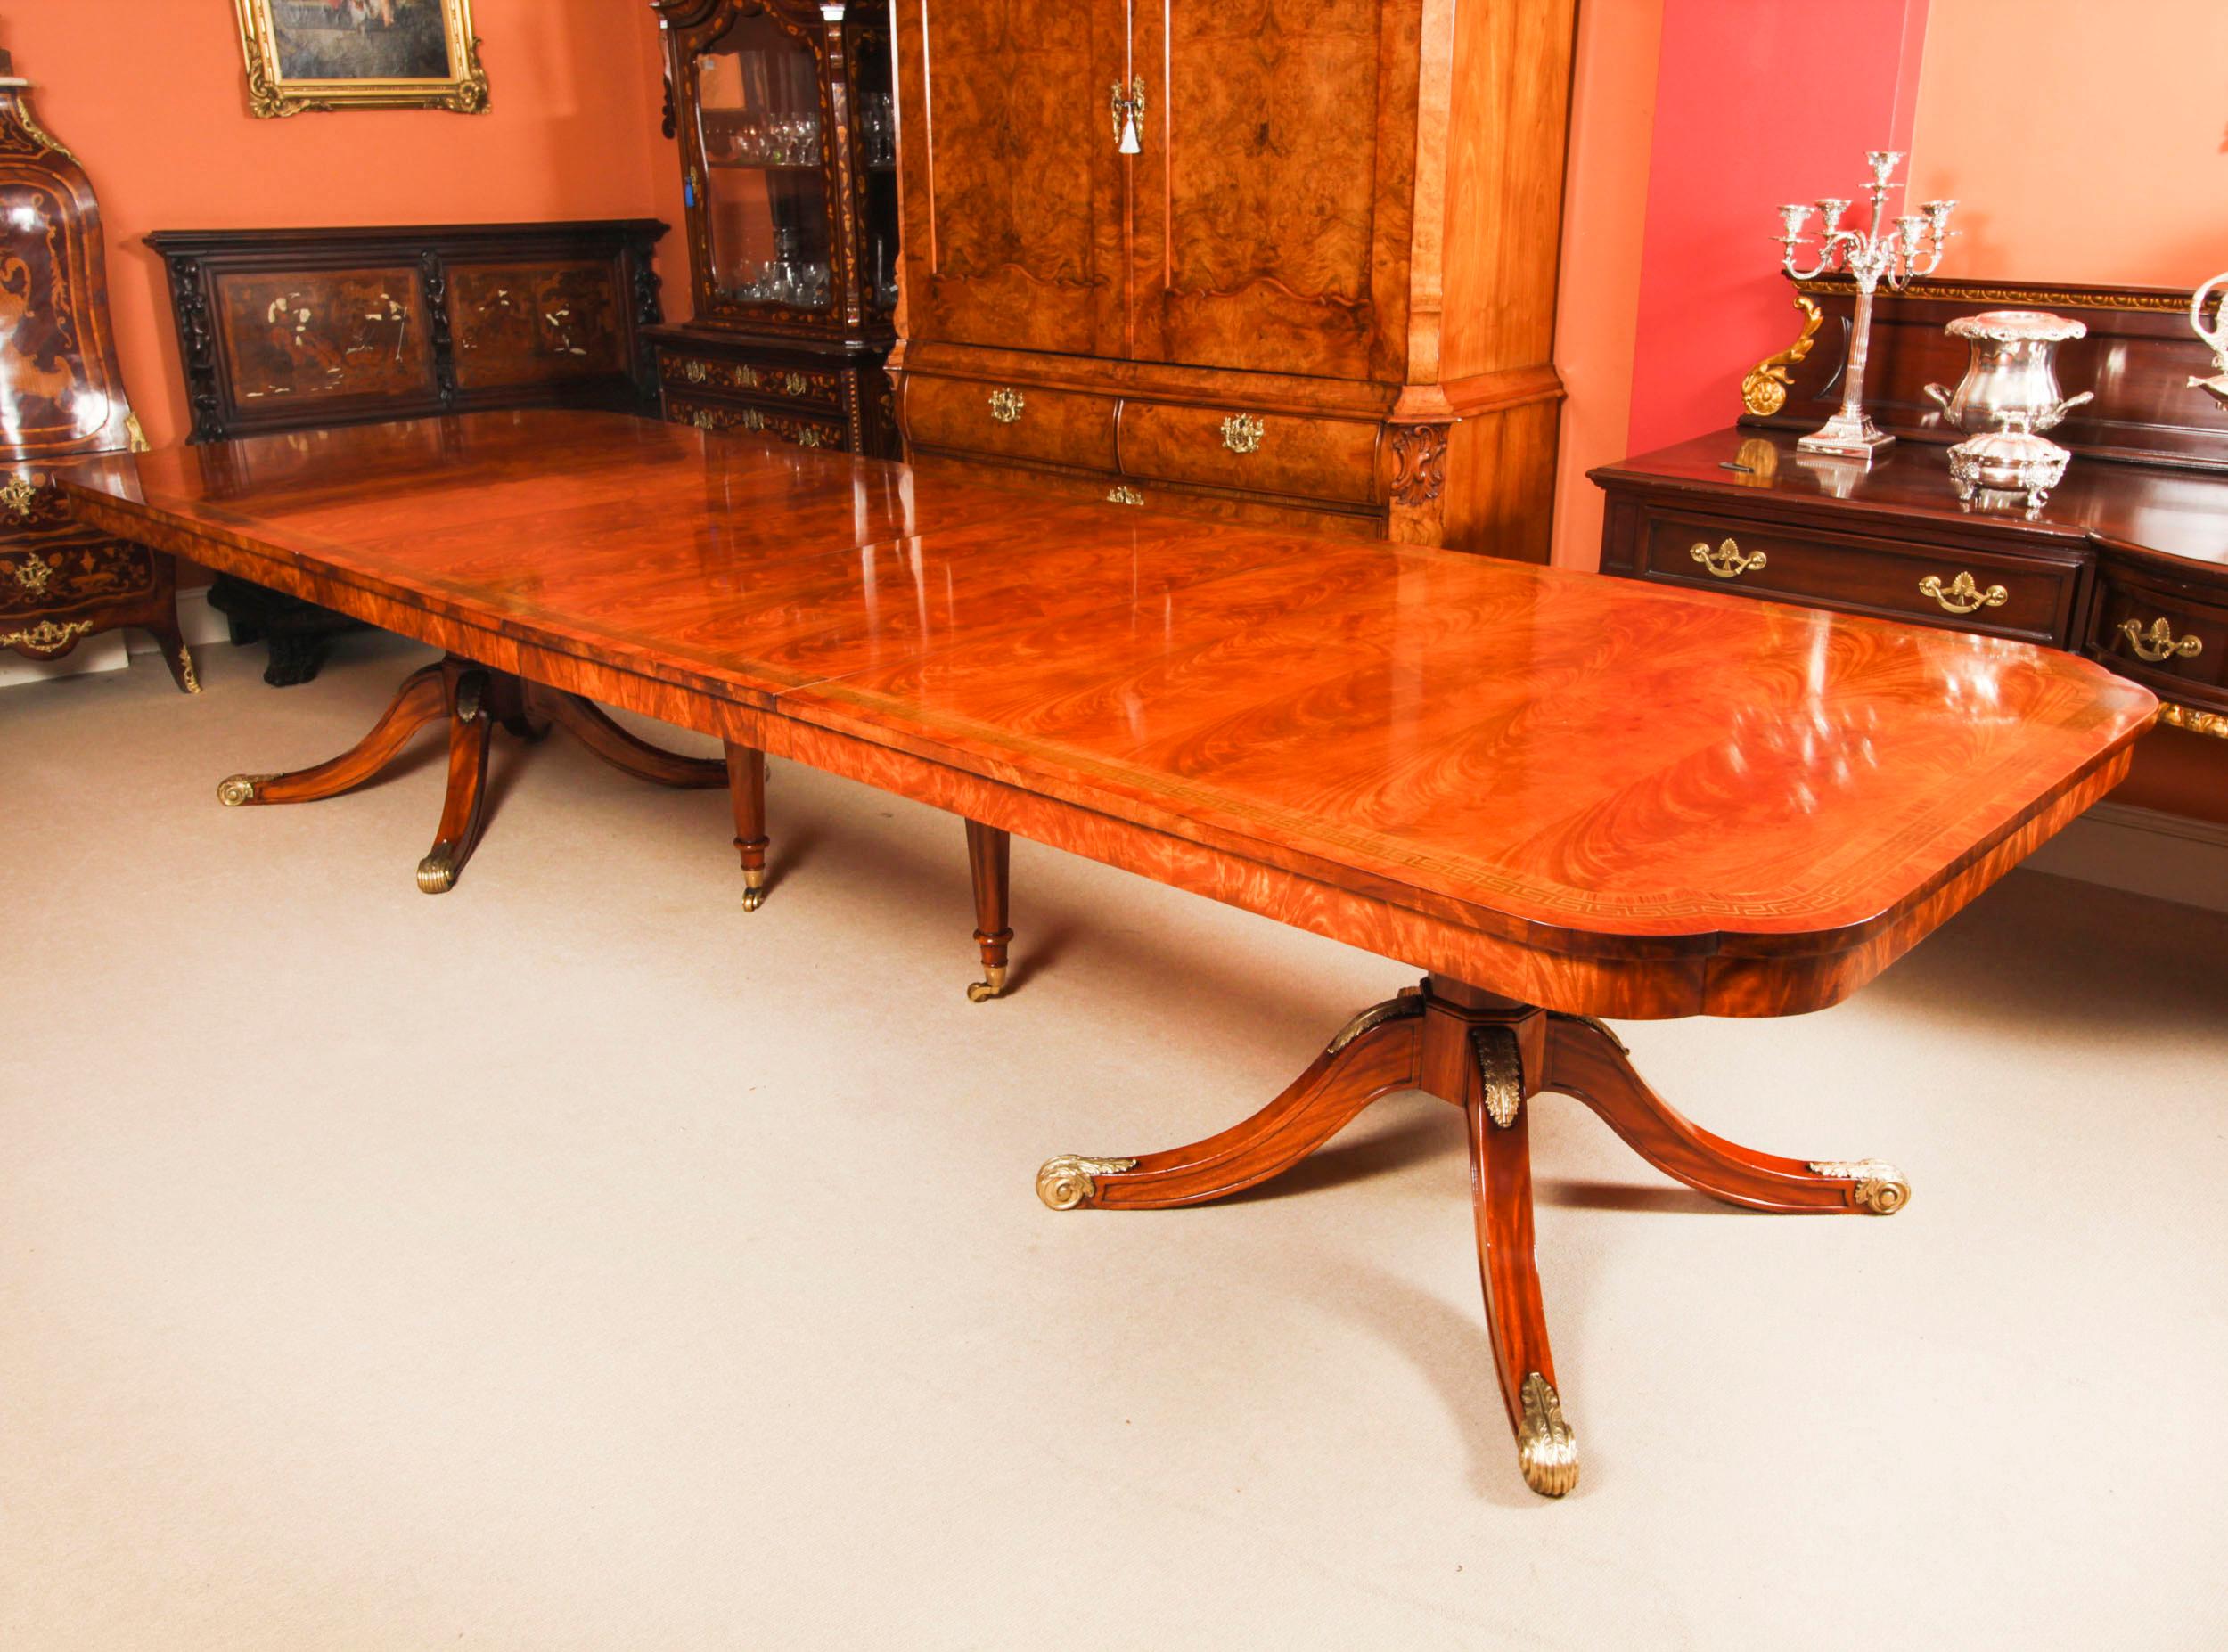 Regency Revival Vintage Brass Inlaid Dining Table 20th C & 14 Antique Athenian Chairs 19th C For Sale